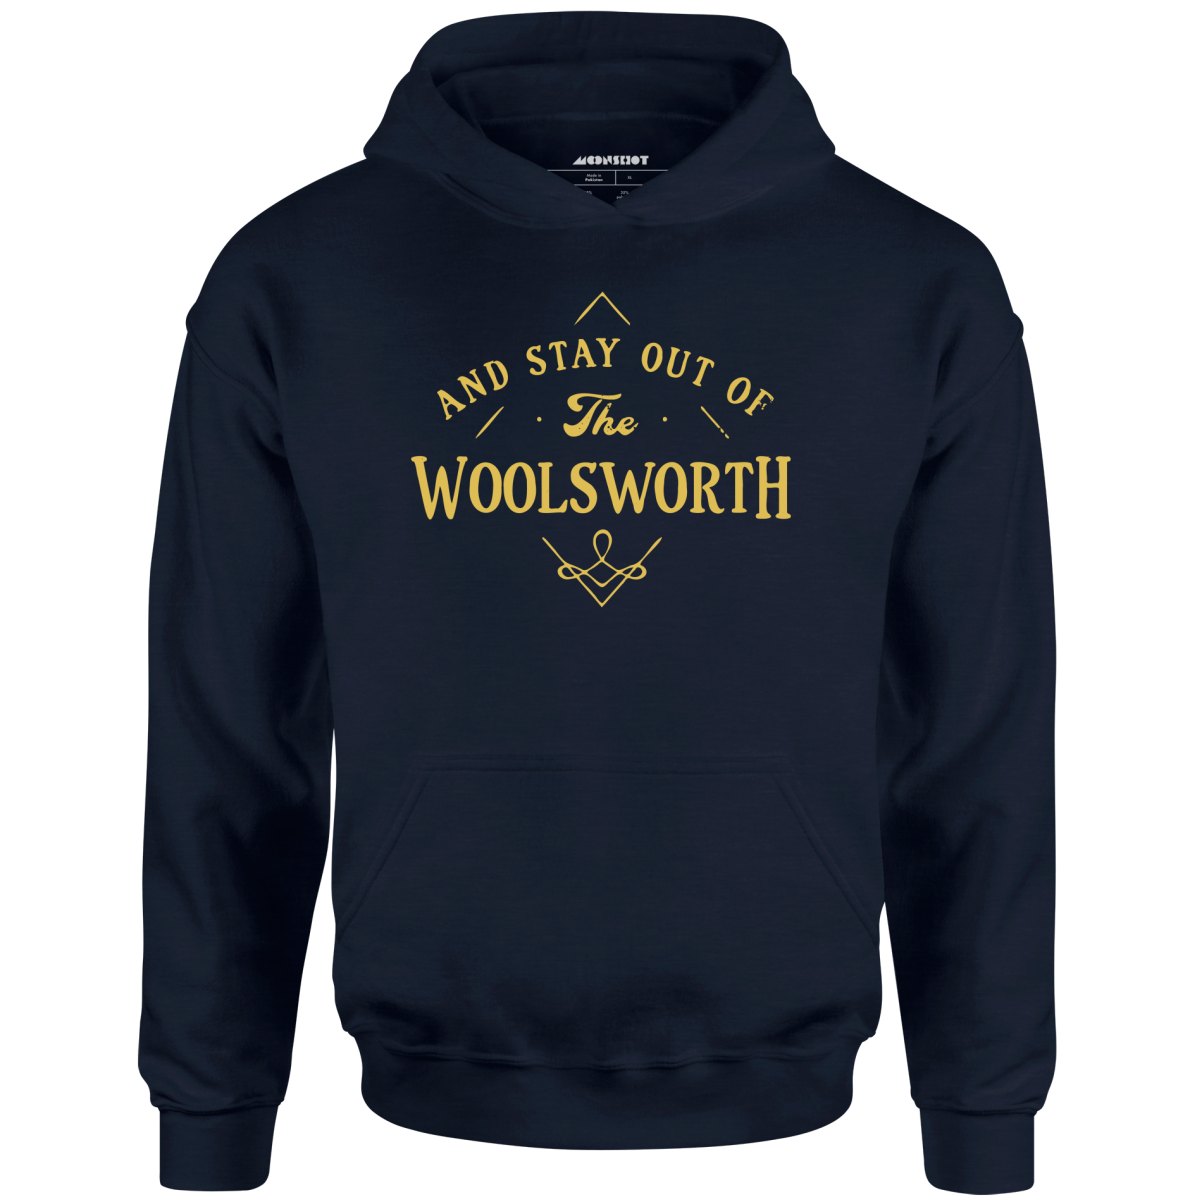 And Stay Out of The Woolsworth - Unisex Hoodie